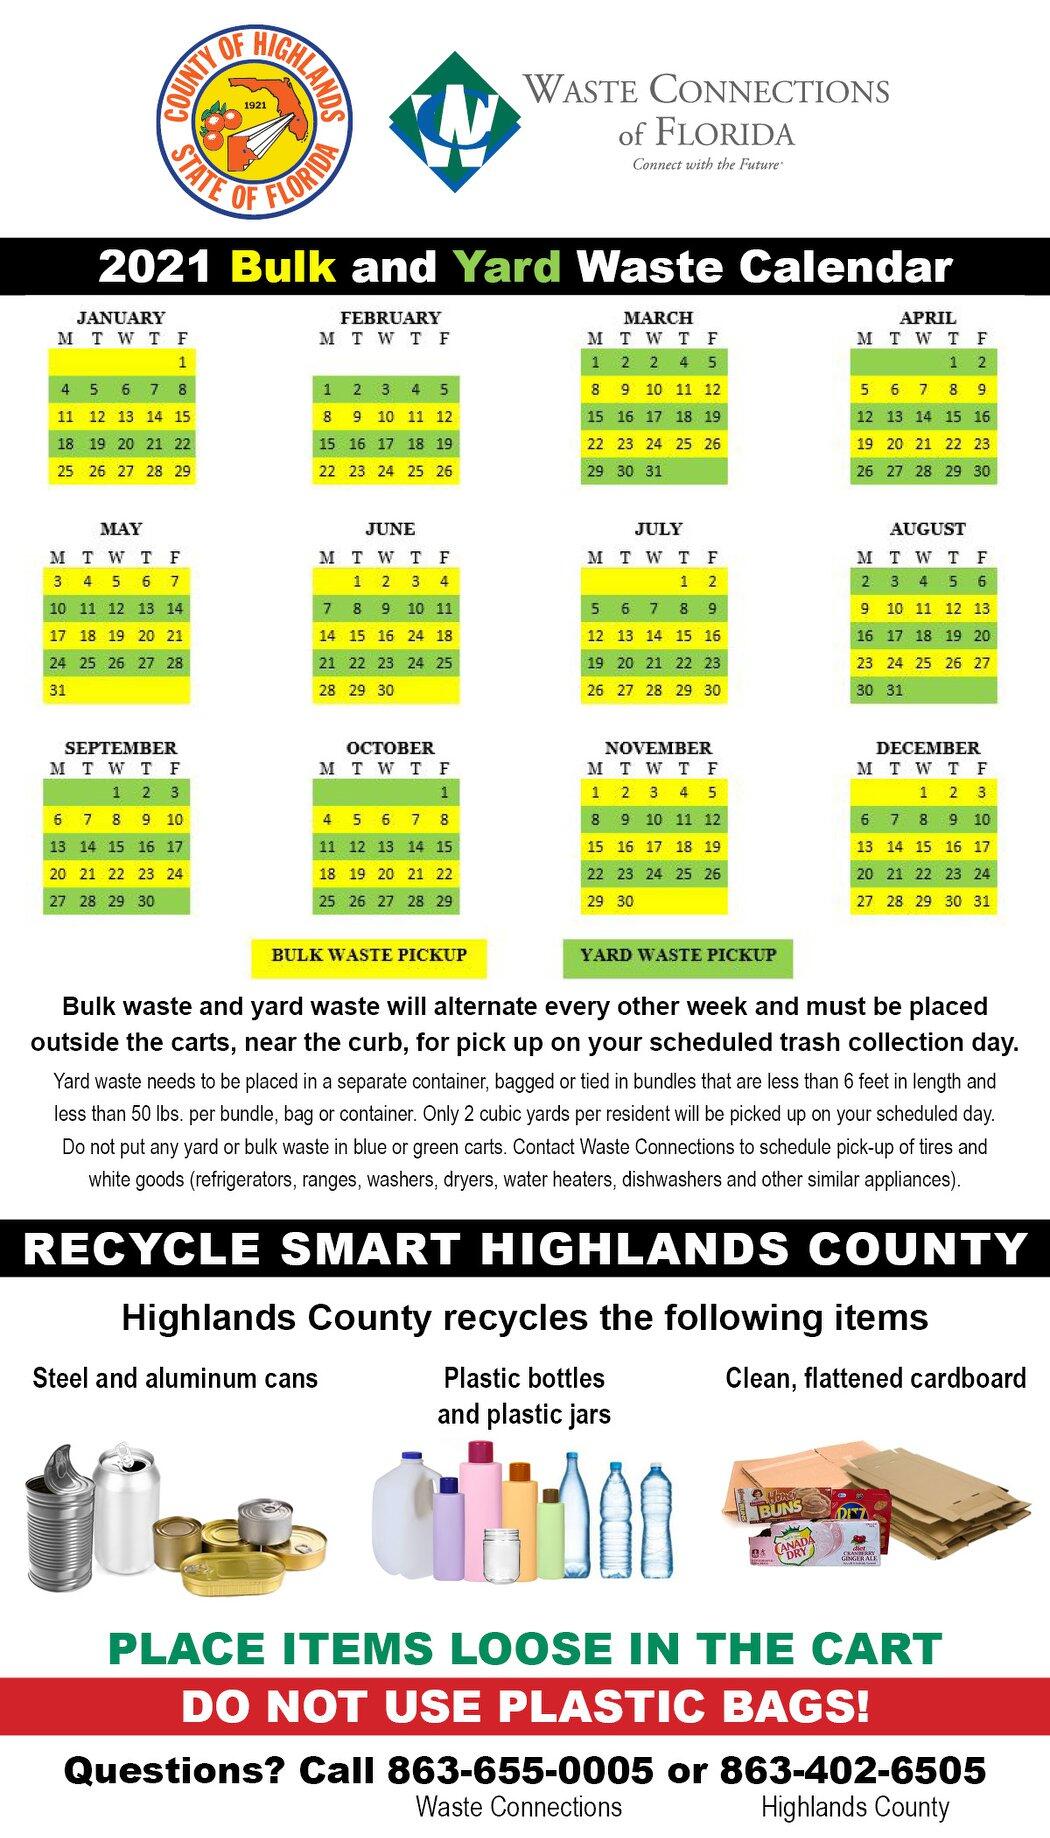 Magnets - 2021 bulk and yard waste calendars (Highlands County